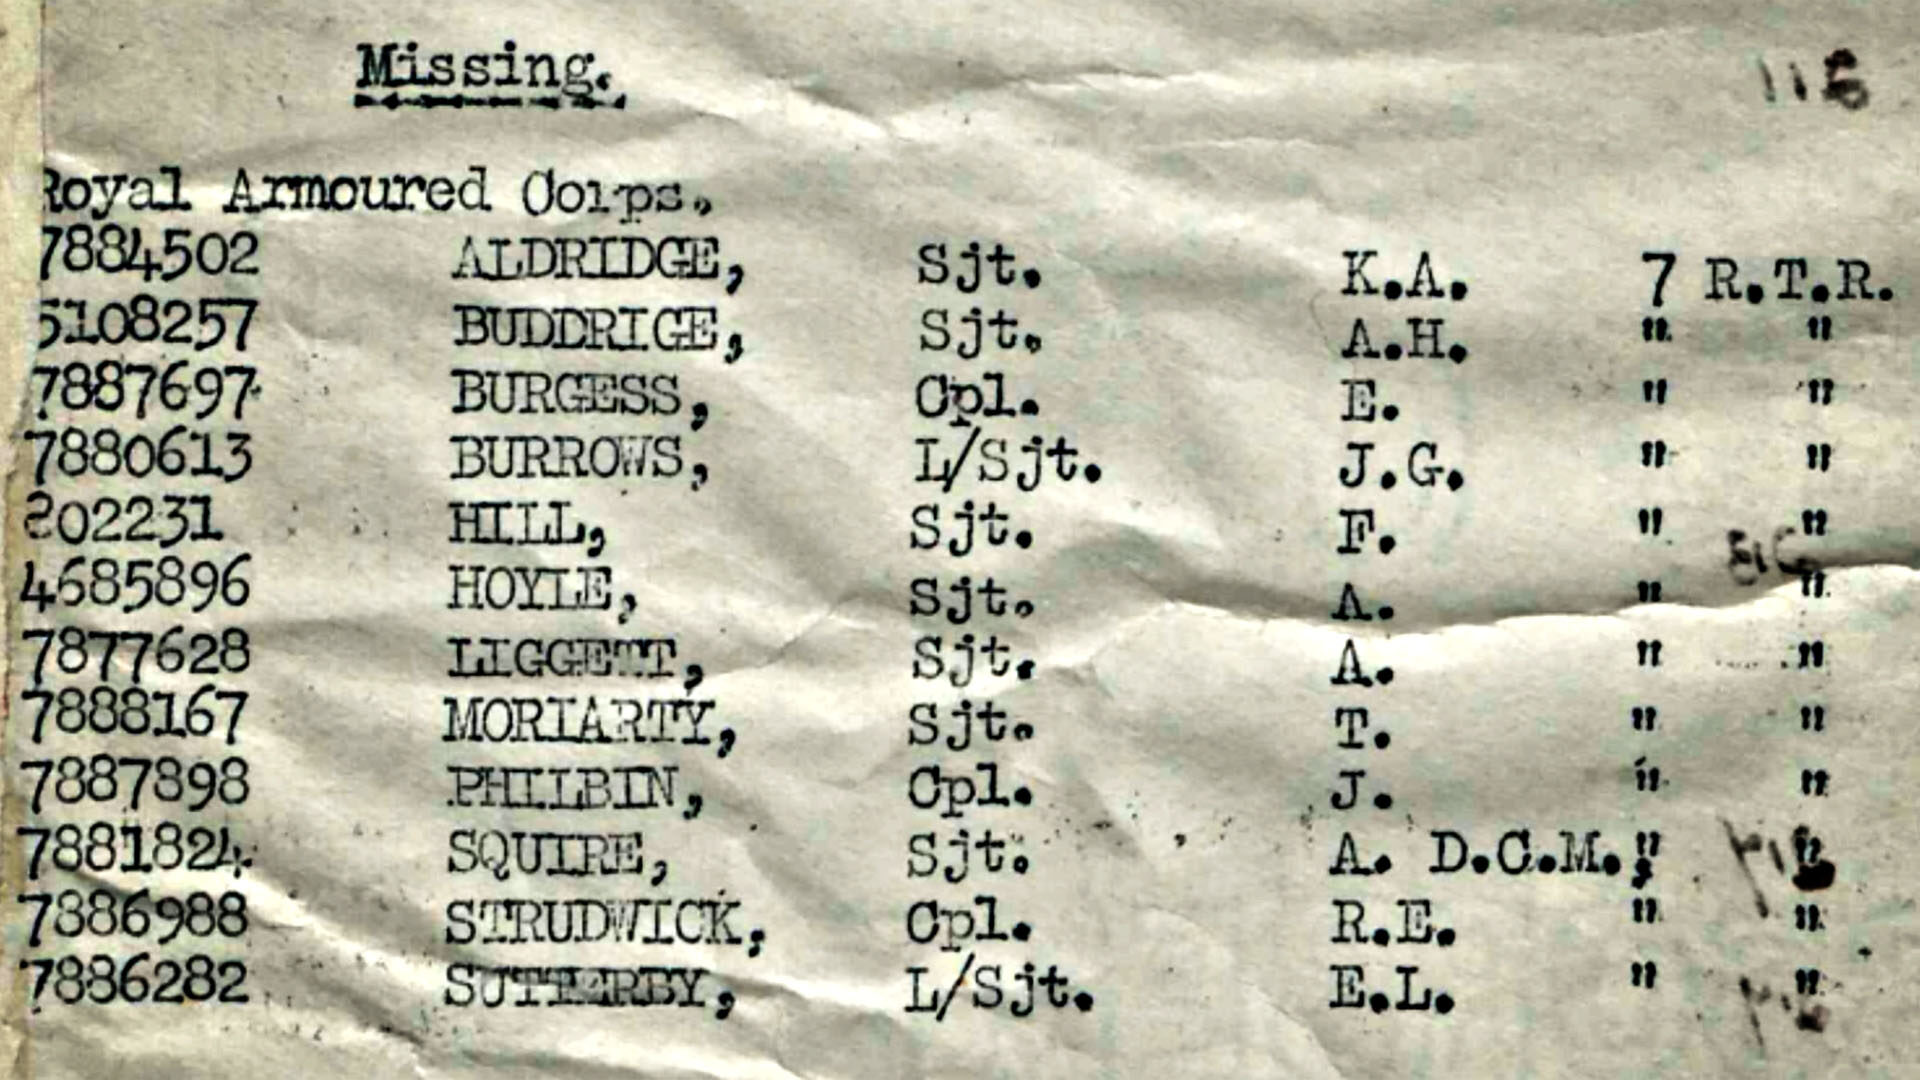 British War Office Casualty List no. 587 showing Sergeant Alexander Liggett of 7 Royal Tank Regiment as missing in the Western Desert in 1941.